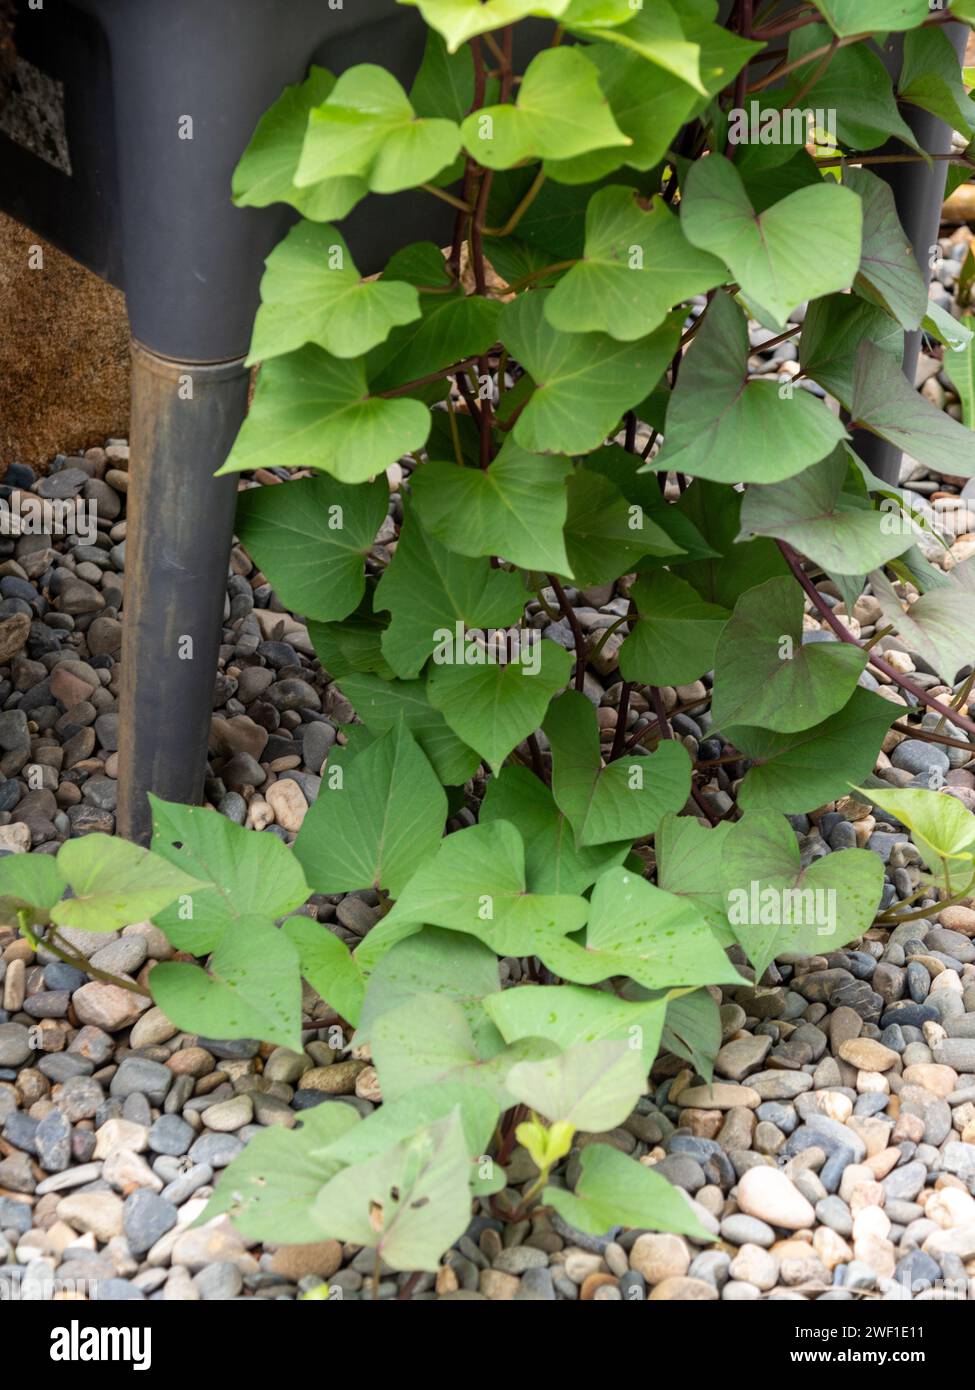 Sweet Potato vines with green leaves trailing from the pot, Australian kitchen garden Stock Photo